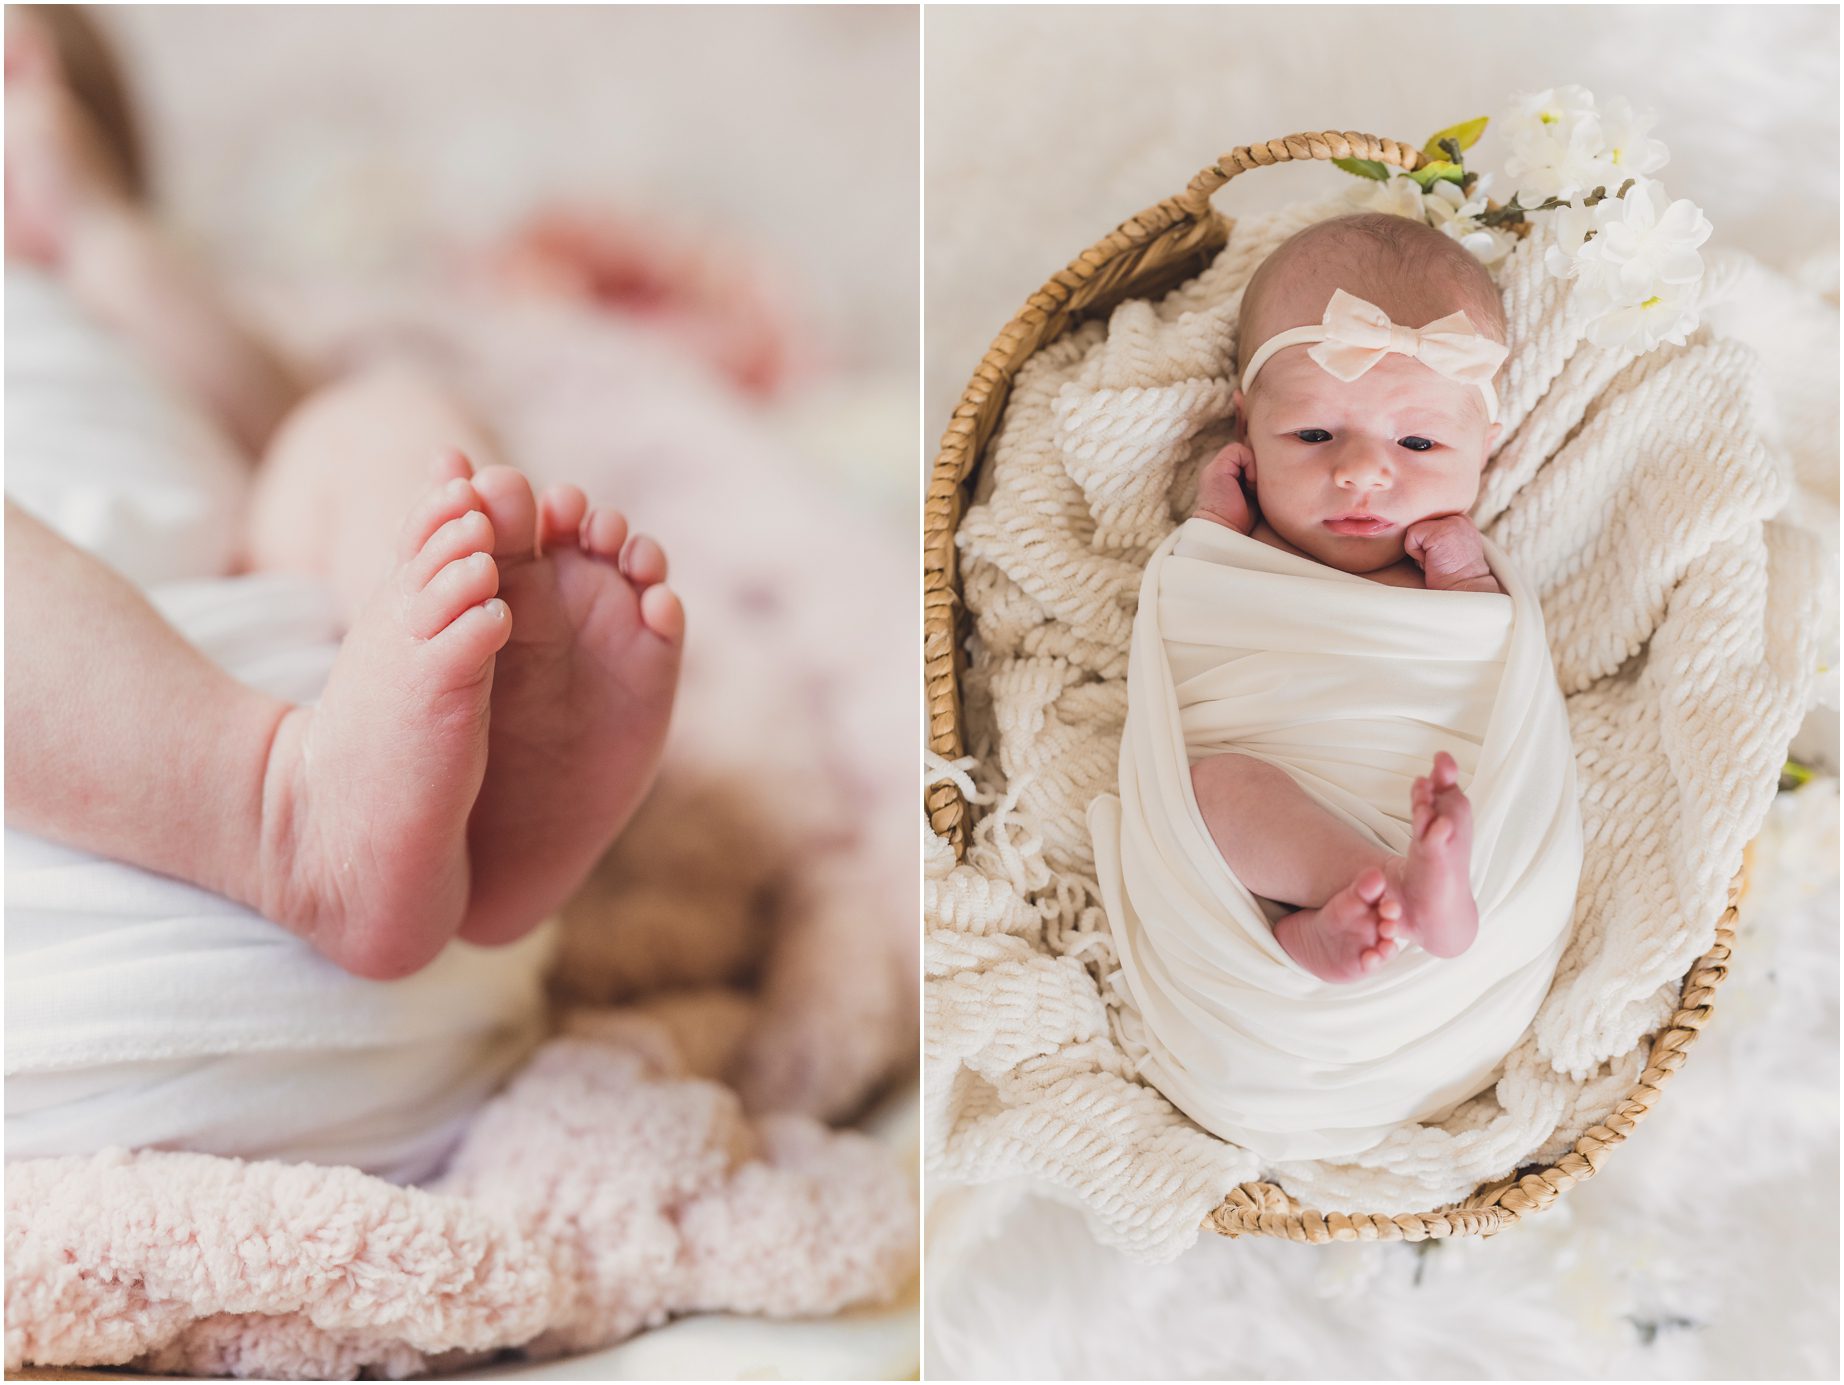 Little Emma's feet touch together as she looks at the camera during her newborn photo session